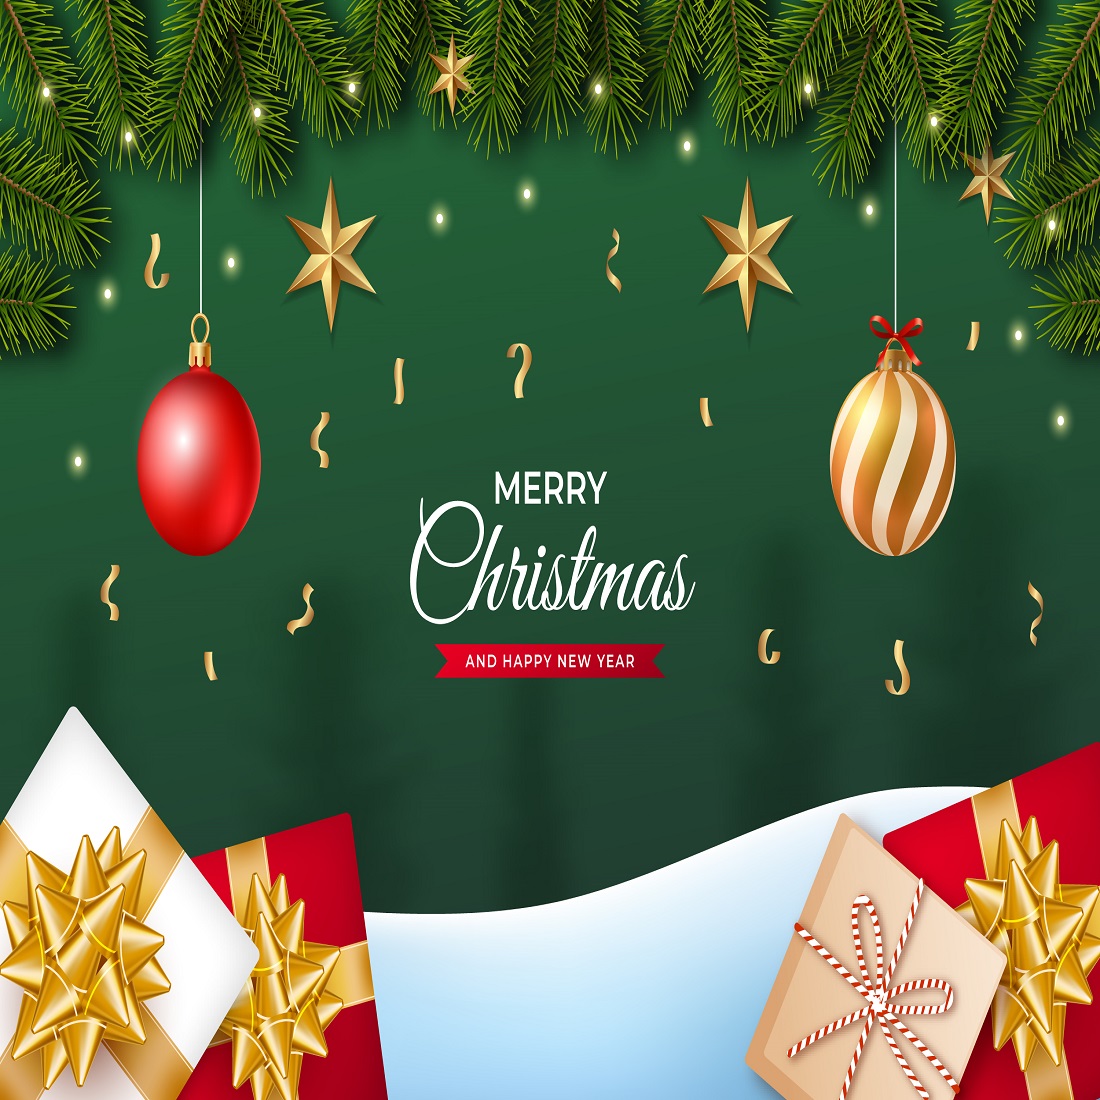 Merry Christmas background preview image.